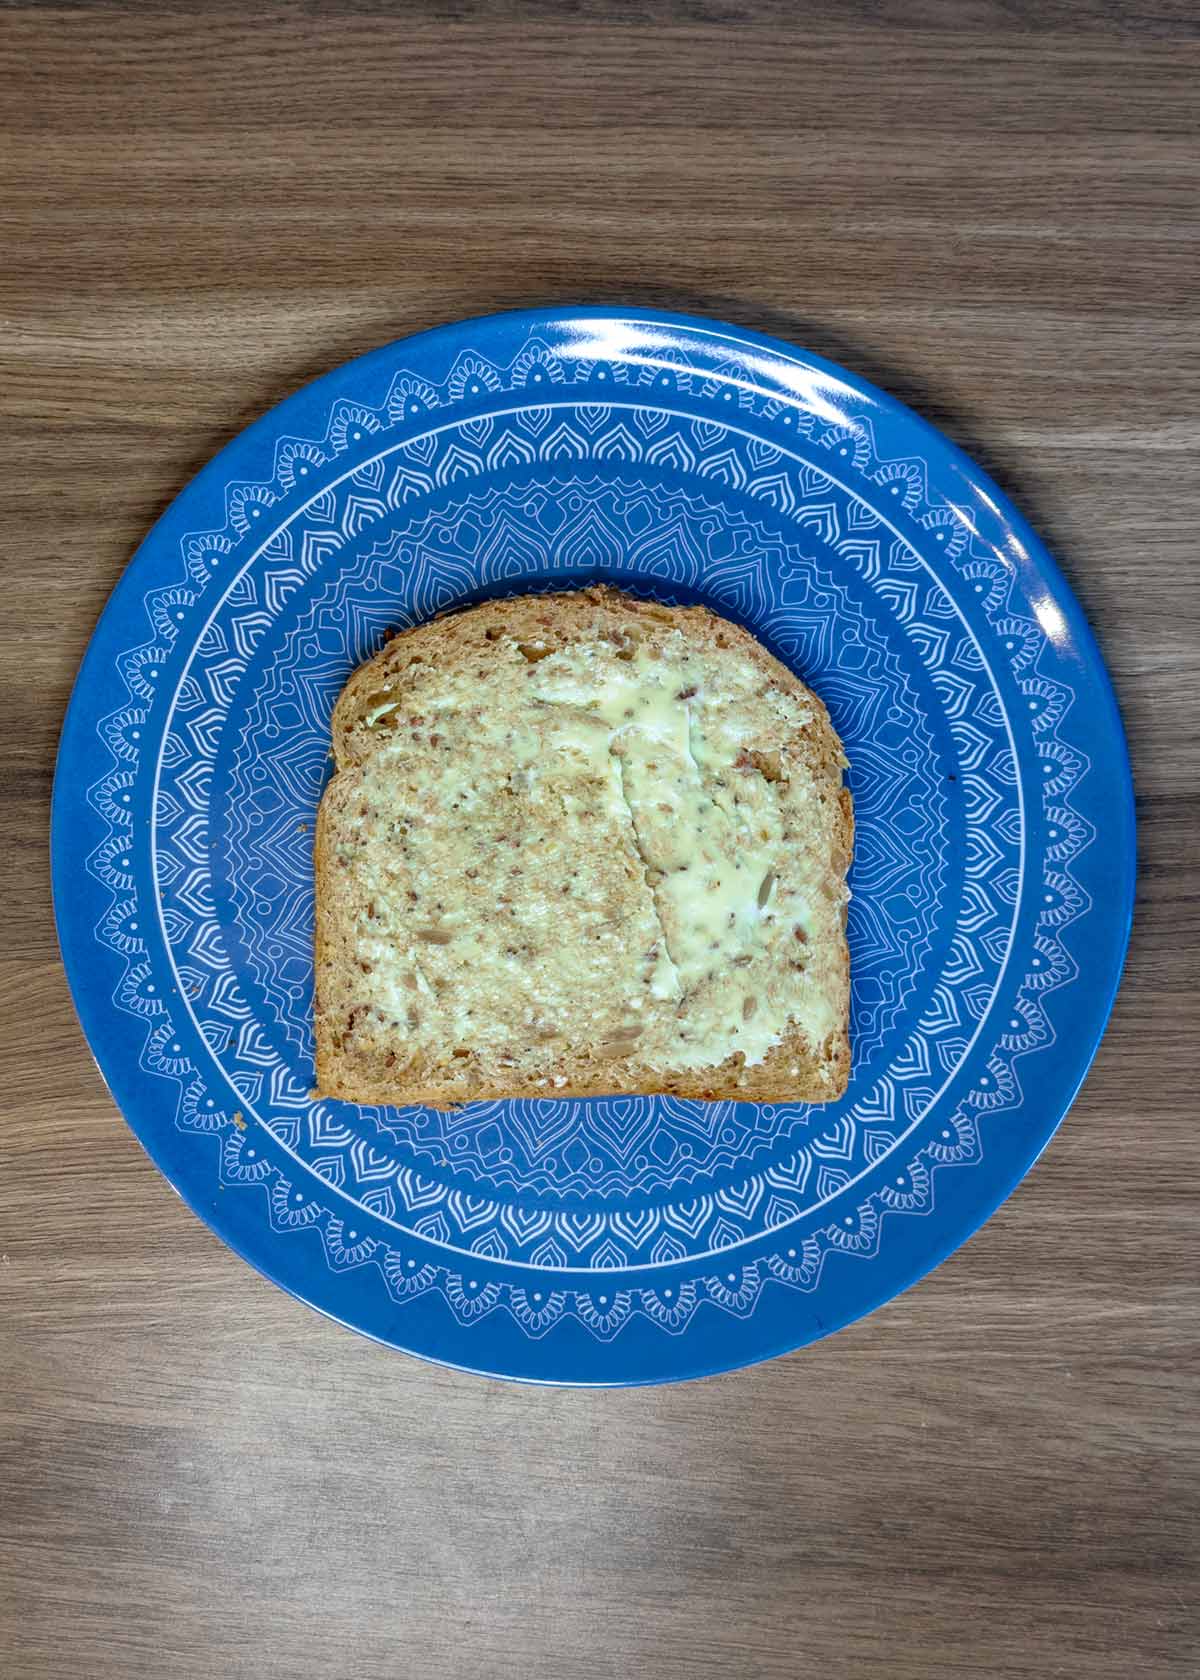 A slice of bread buttered on one side.